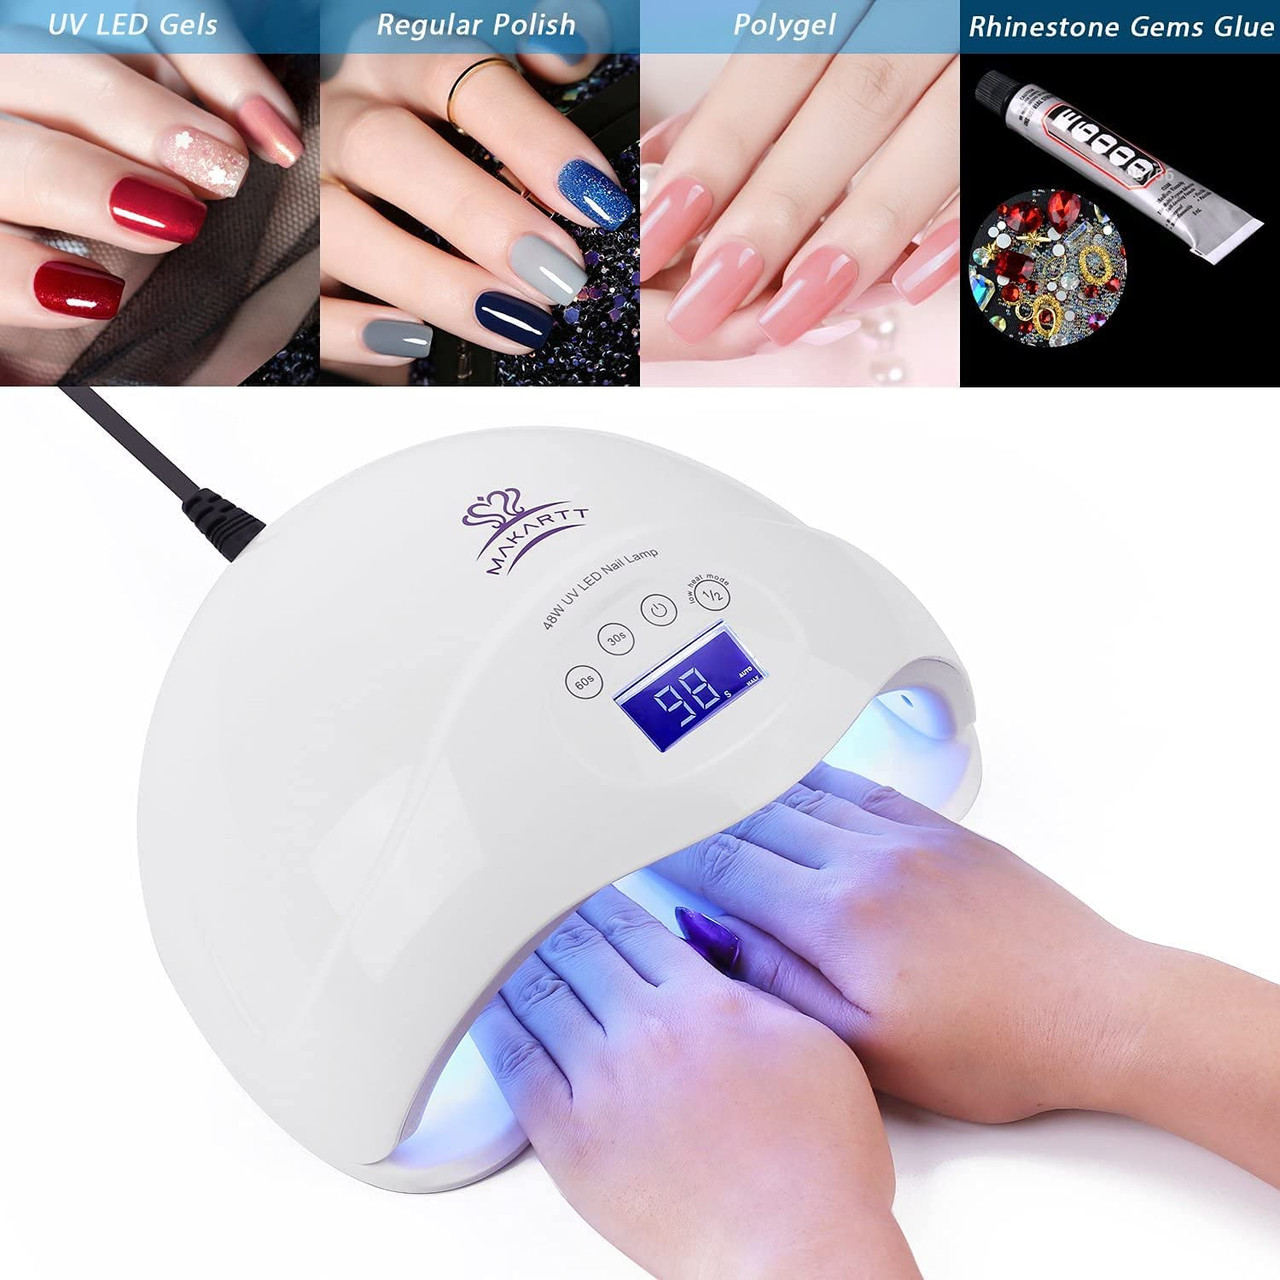 Upgraded Cordless 168w Nail Lamp With 66W Rechargeable Lamp, UV LED  Manicure Machine For Wireless Nails Model 231020 From Bao04, $38.65 |  DHgate.Com